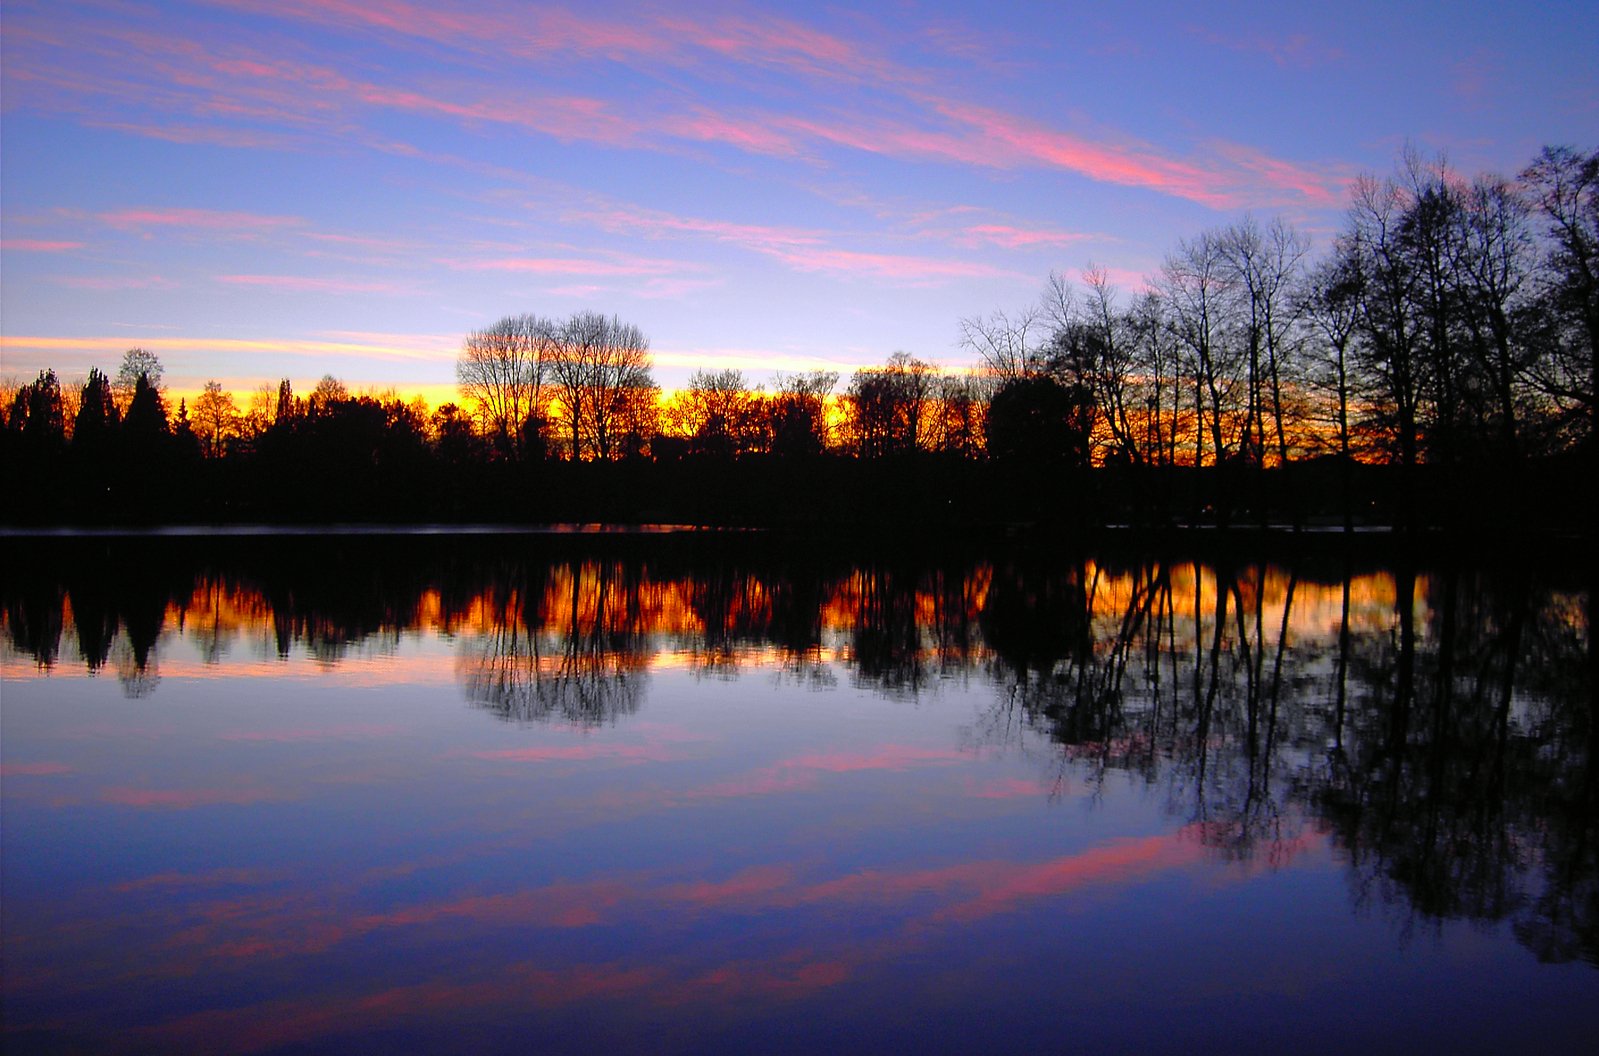 the sky has been reflected in a still lake